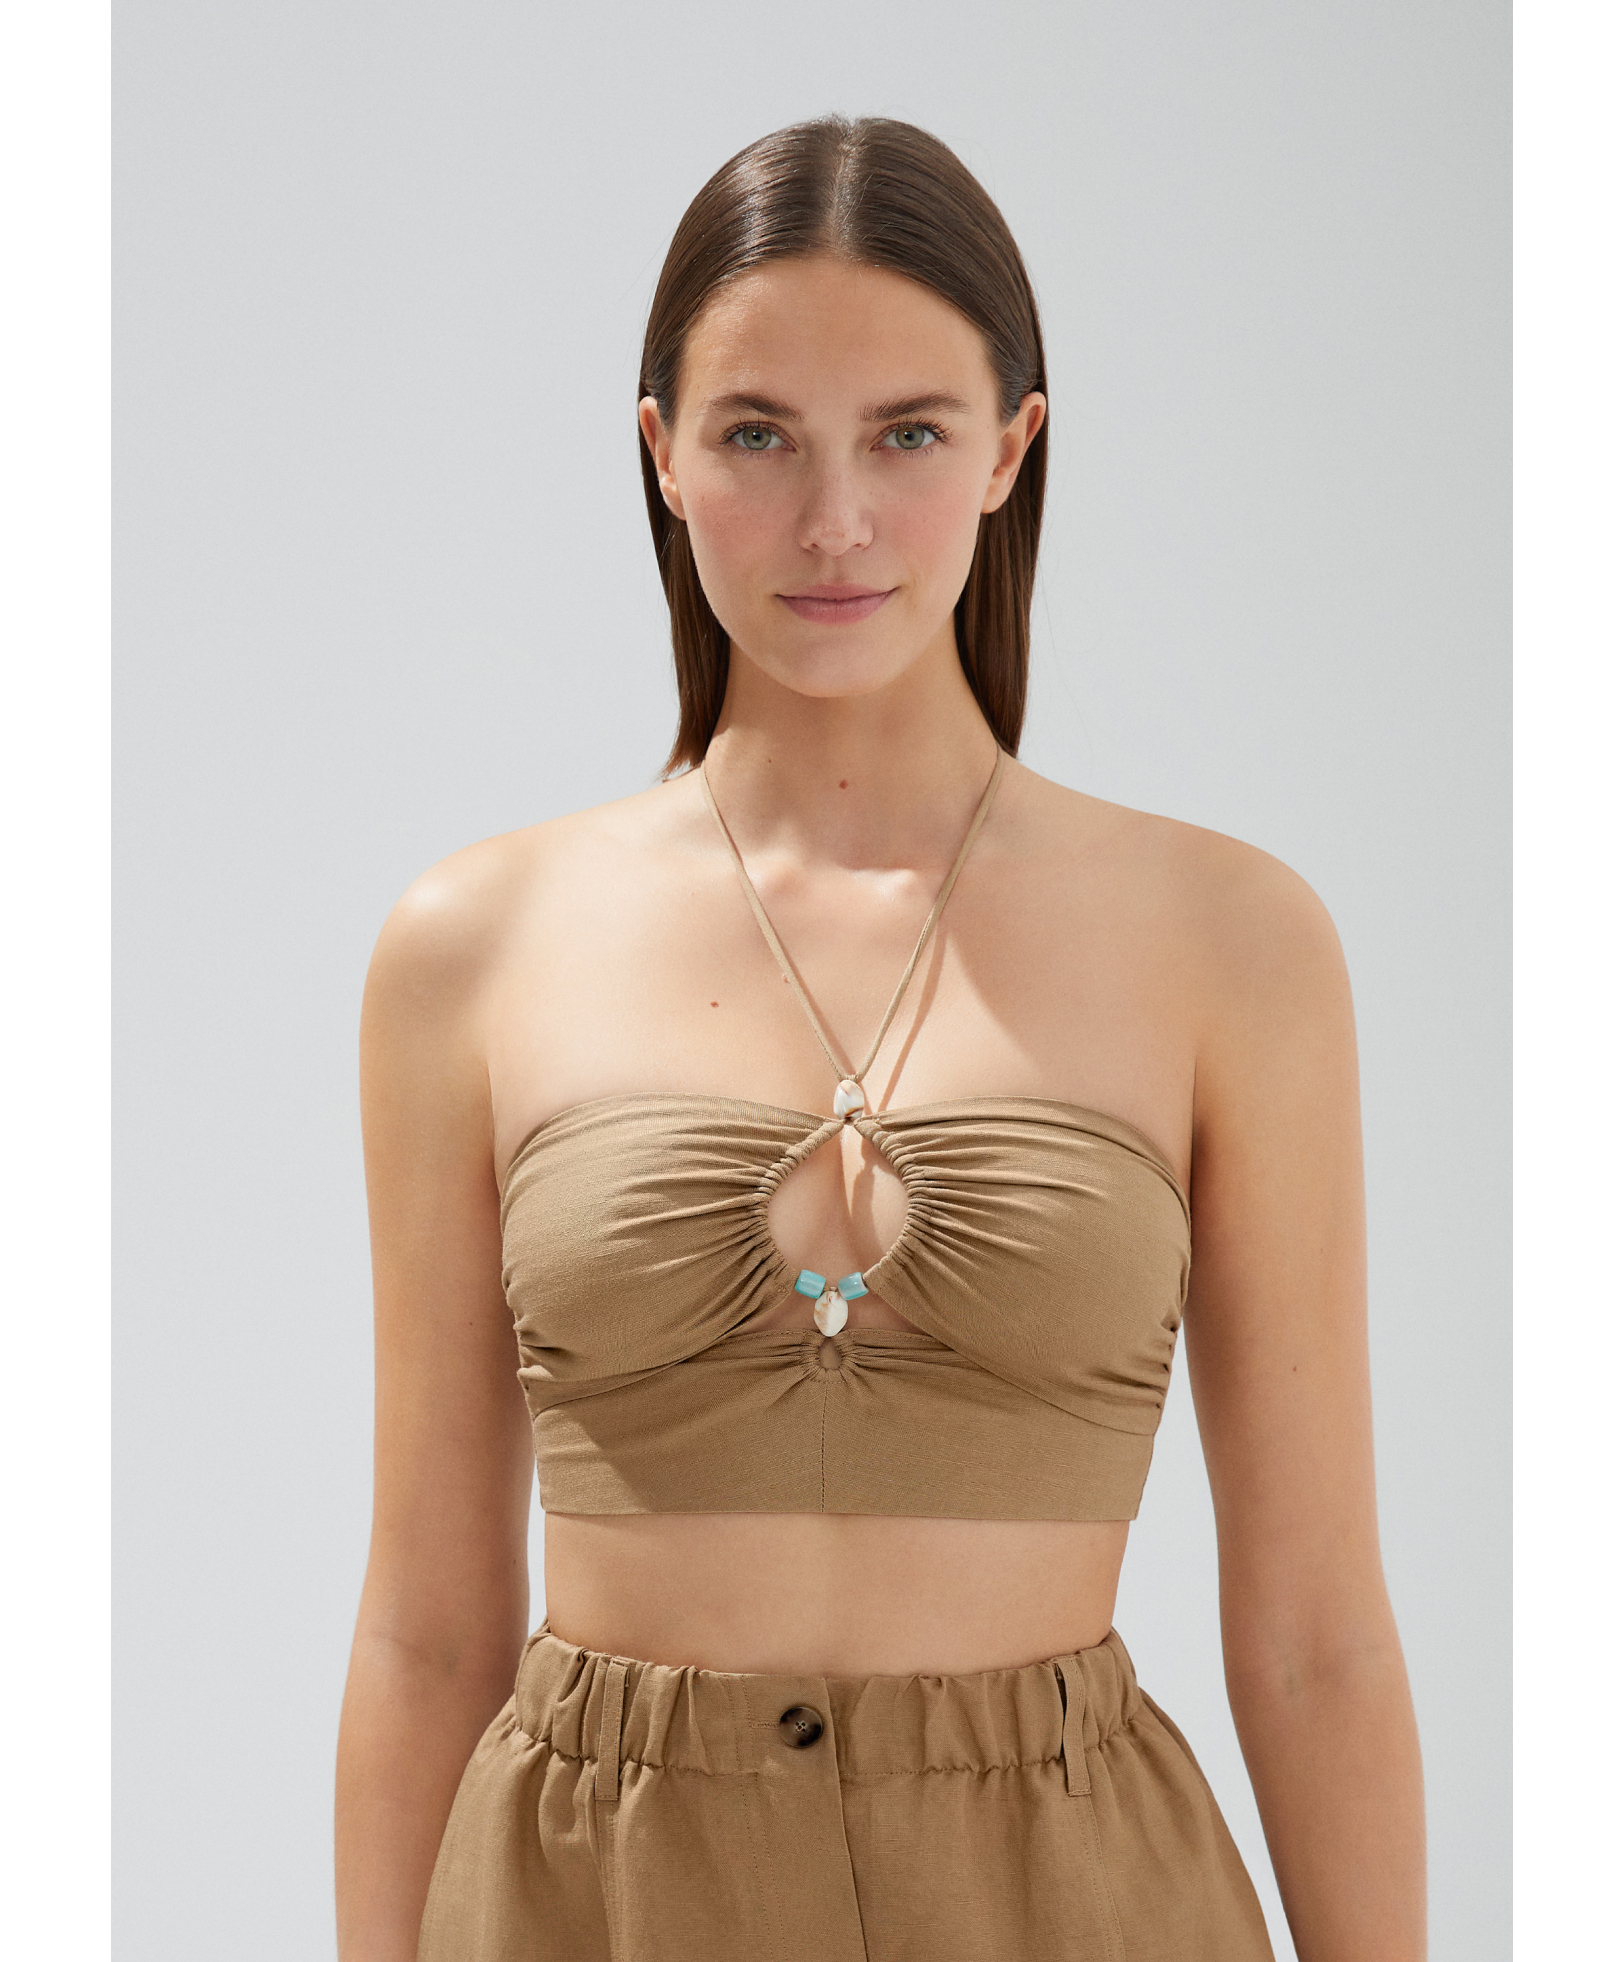 Linen strappy top with stone details